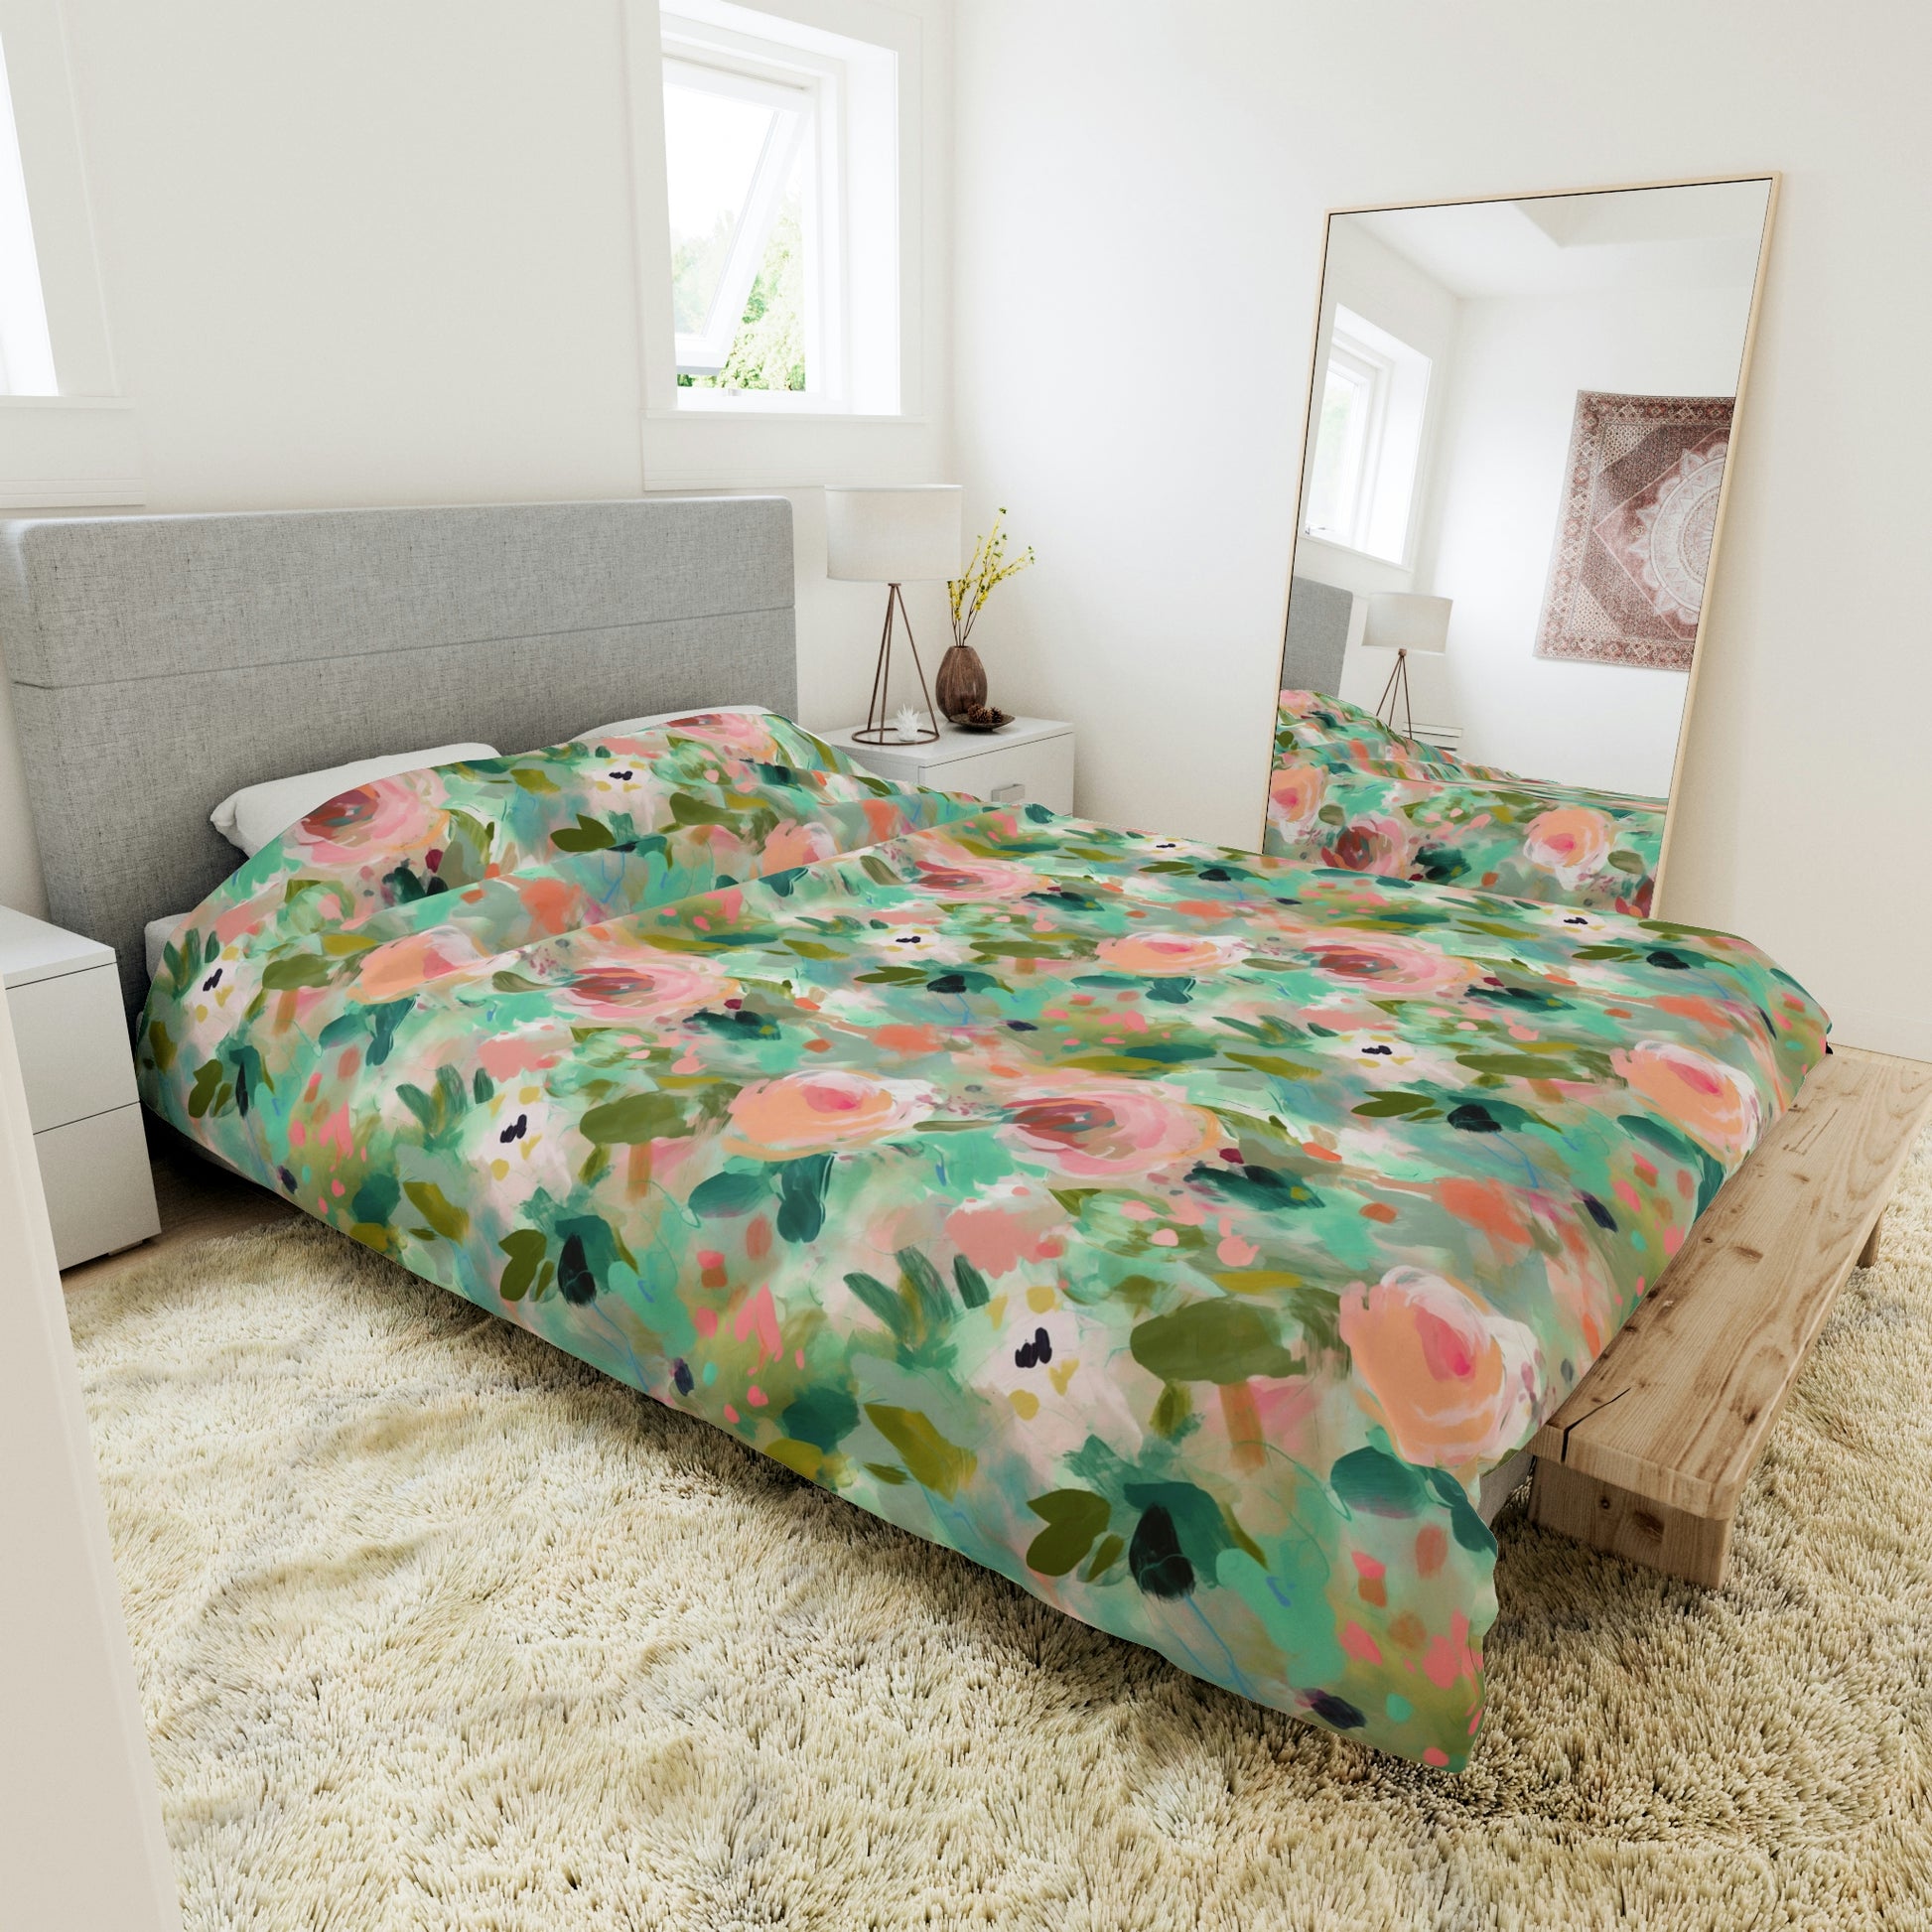 pink and green floral duvet cover on a bed, duvet cover with pink and green flowers on it, green duvet cover, pink duvet cover, green and pink abstract floral duvet cover